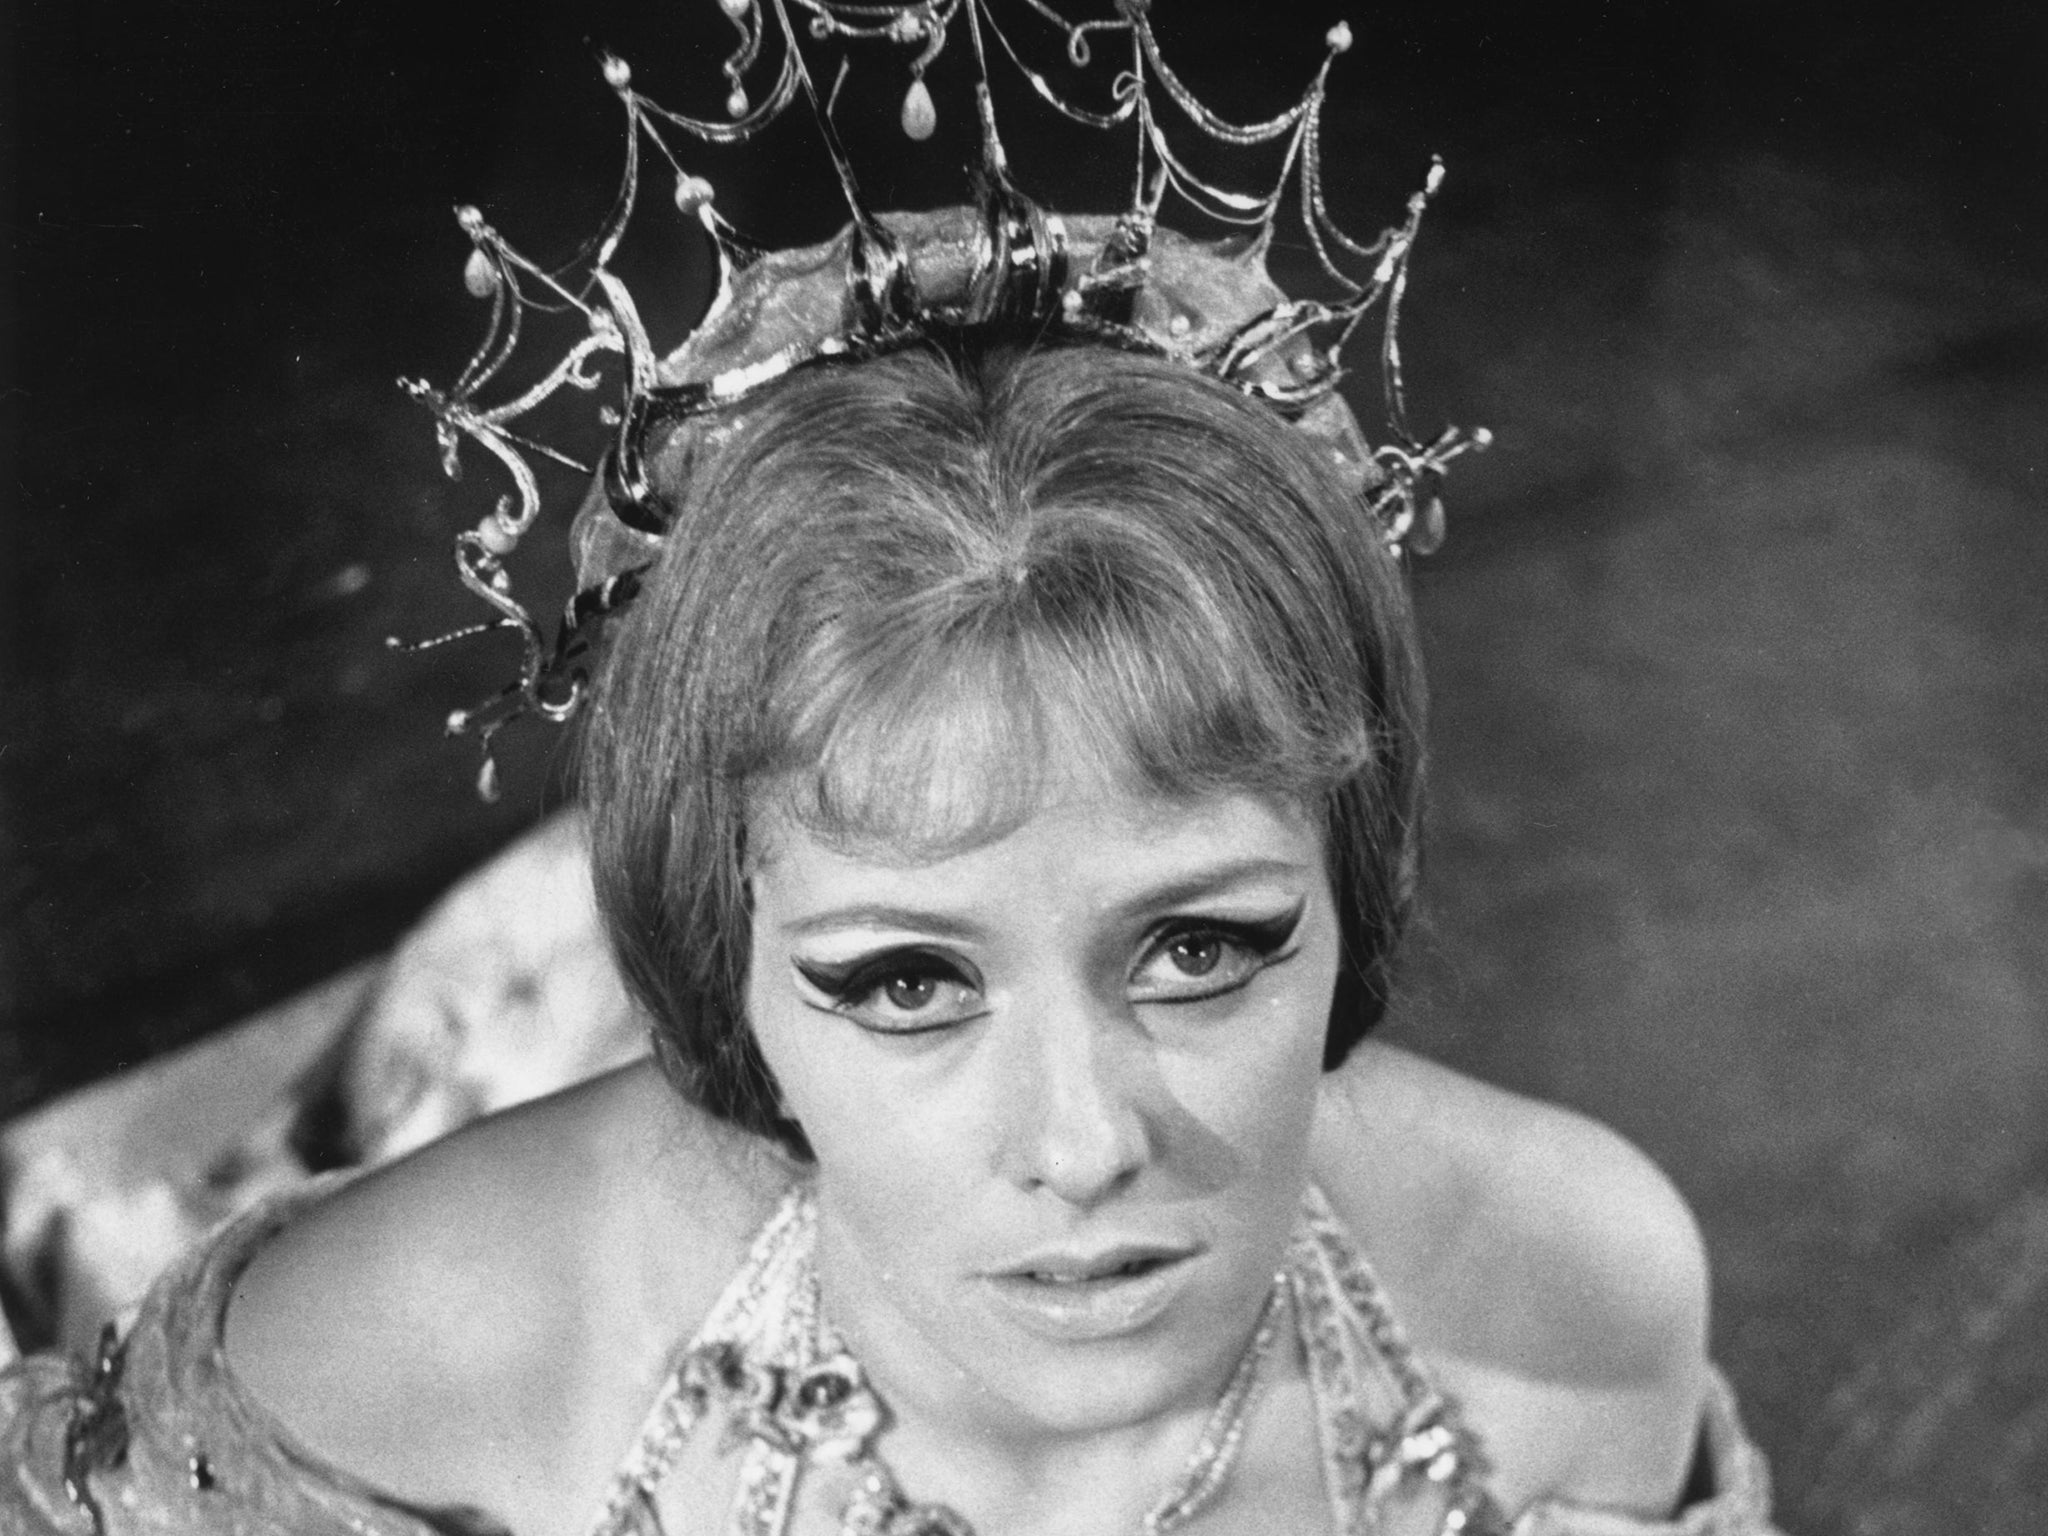 Howells in 1969 in rehearsal for the British premiere of Humphrey Searle’s adaptation of ‘Hamlet’ at the Royal Opera House